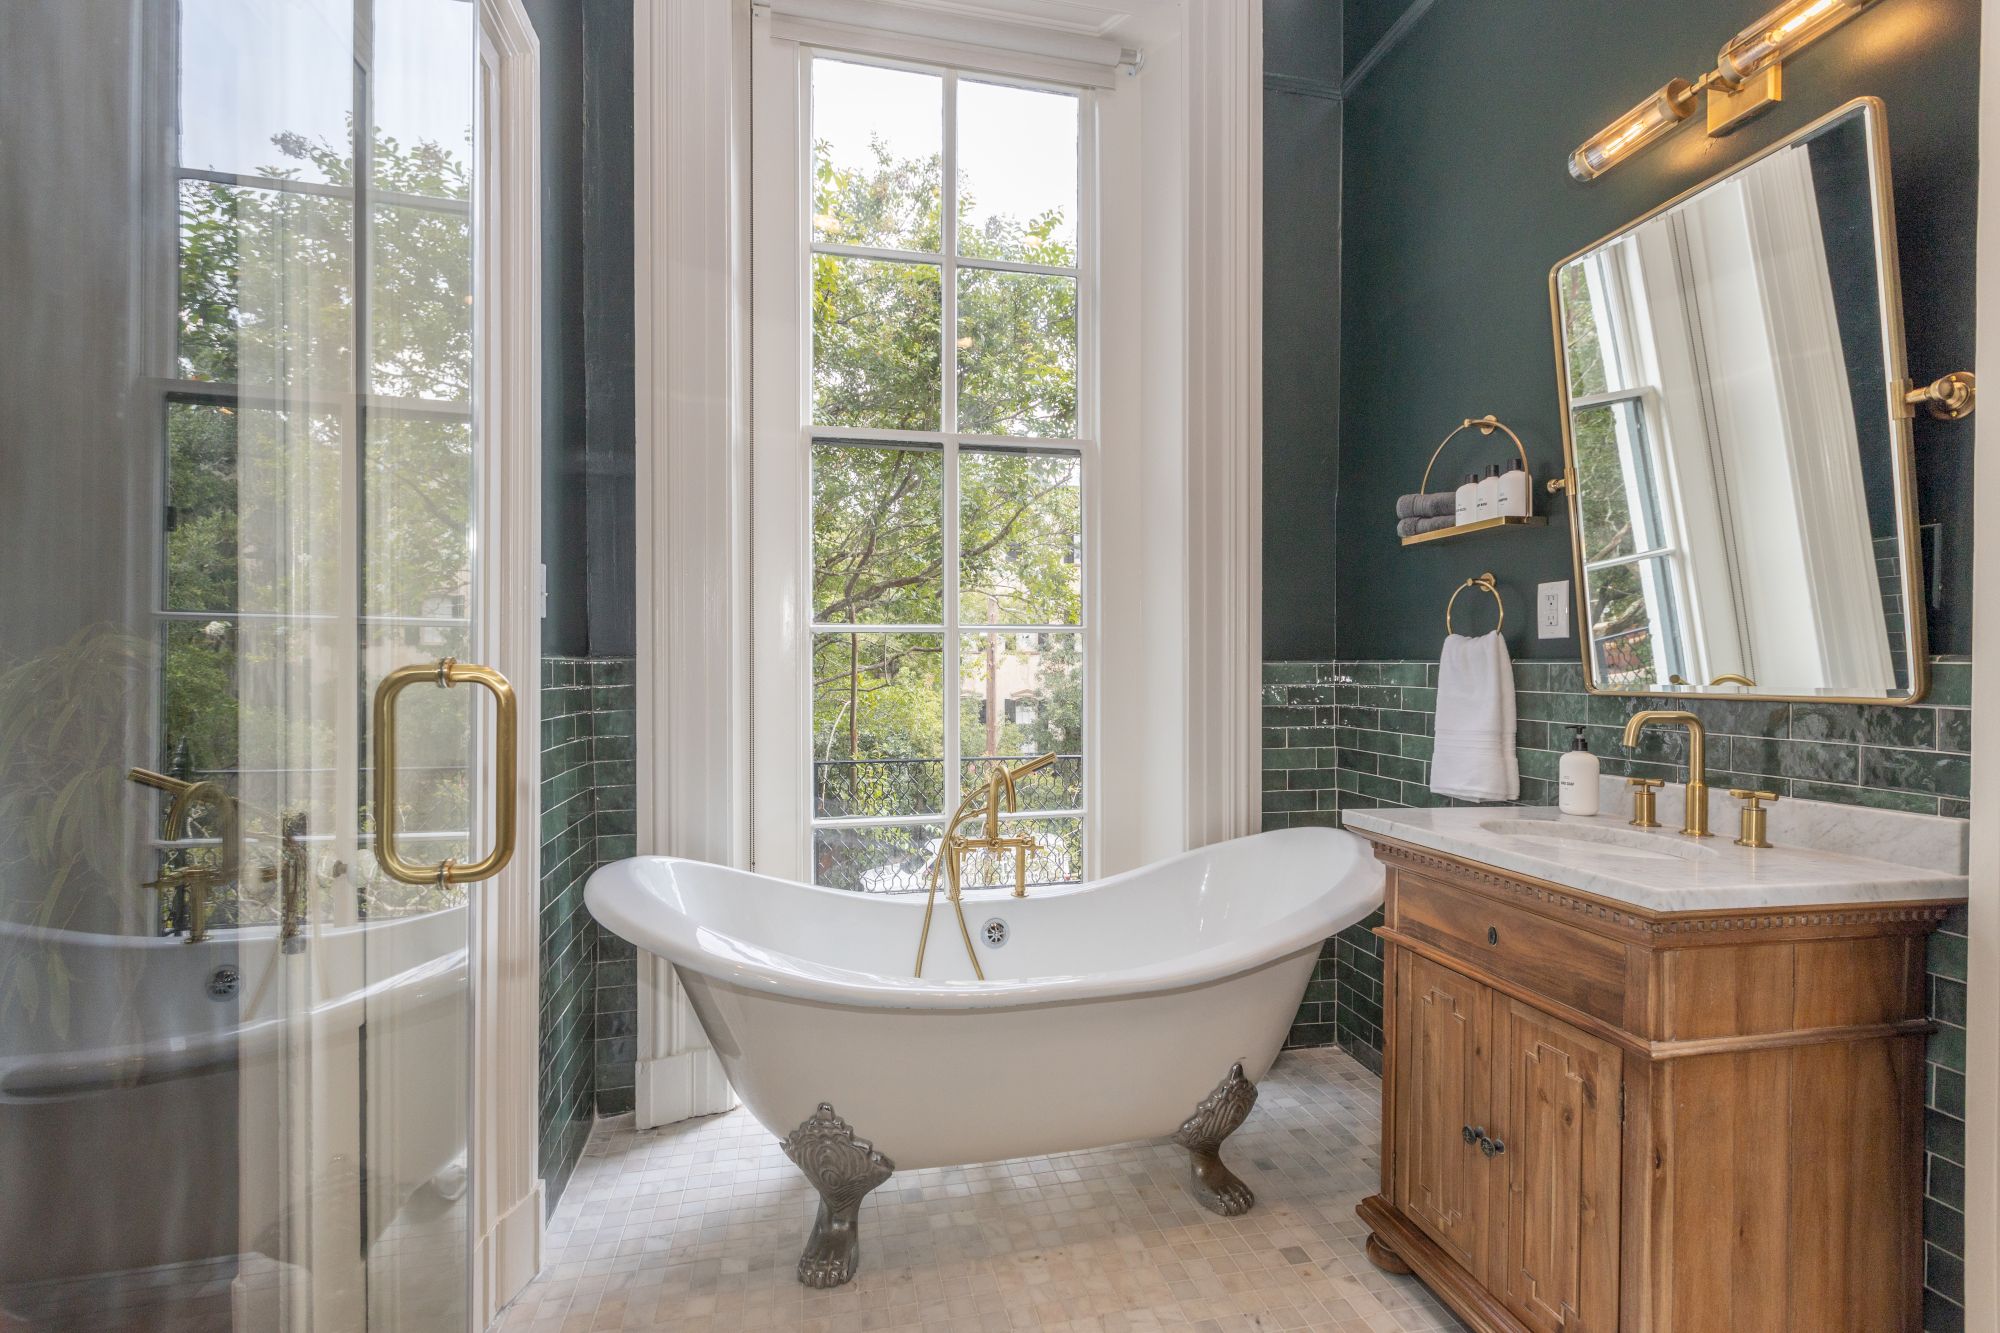 The image shows a bathroom with a central freestanding bathtub, a vanity with a sink and mirror, green tiled walls, and a large window providing natural light.